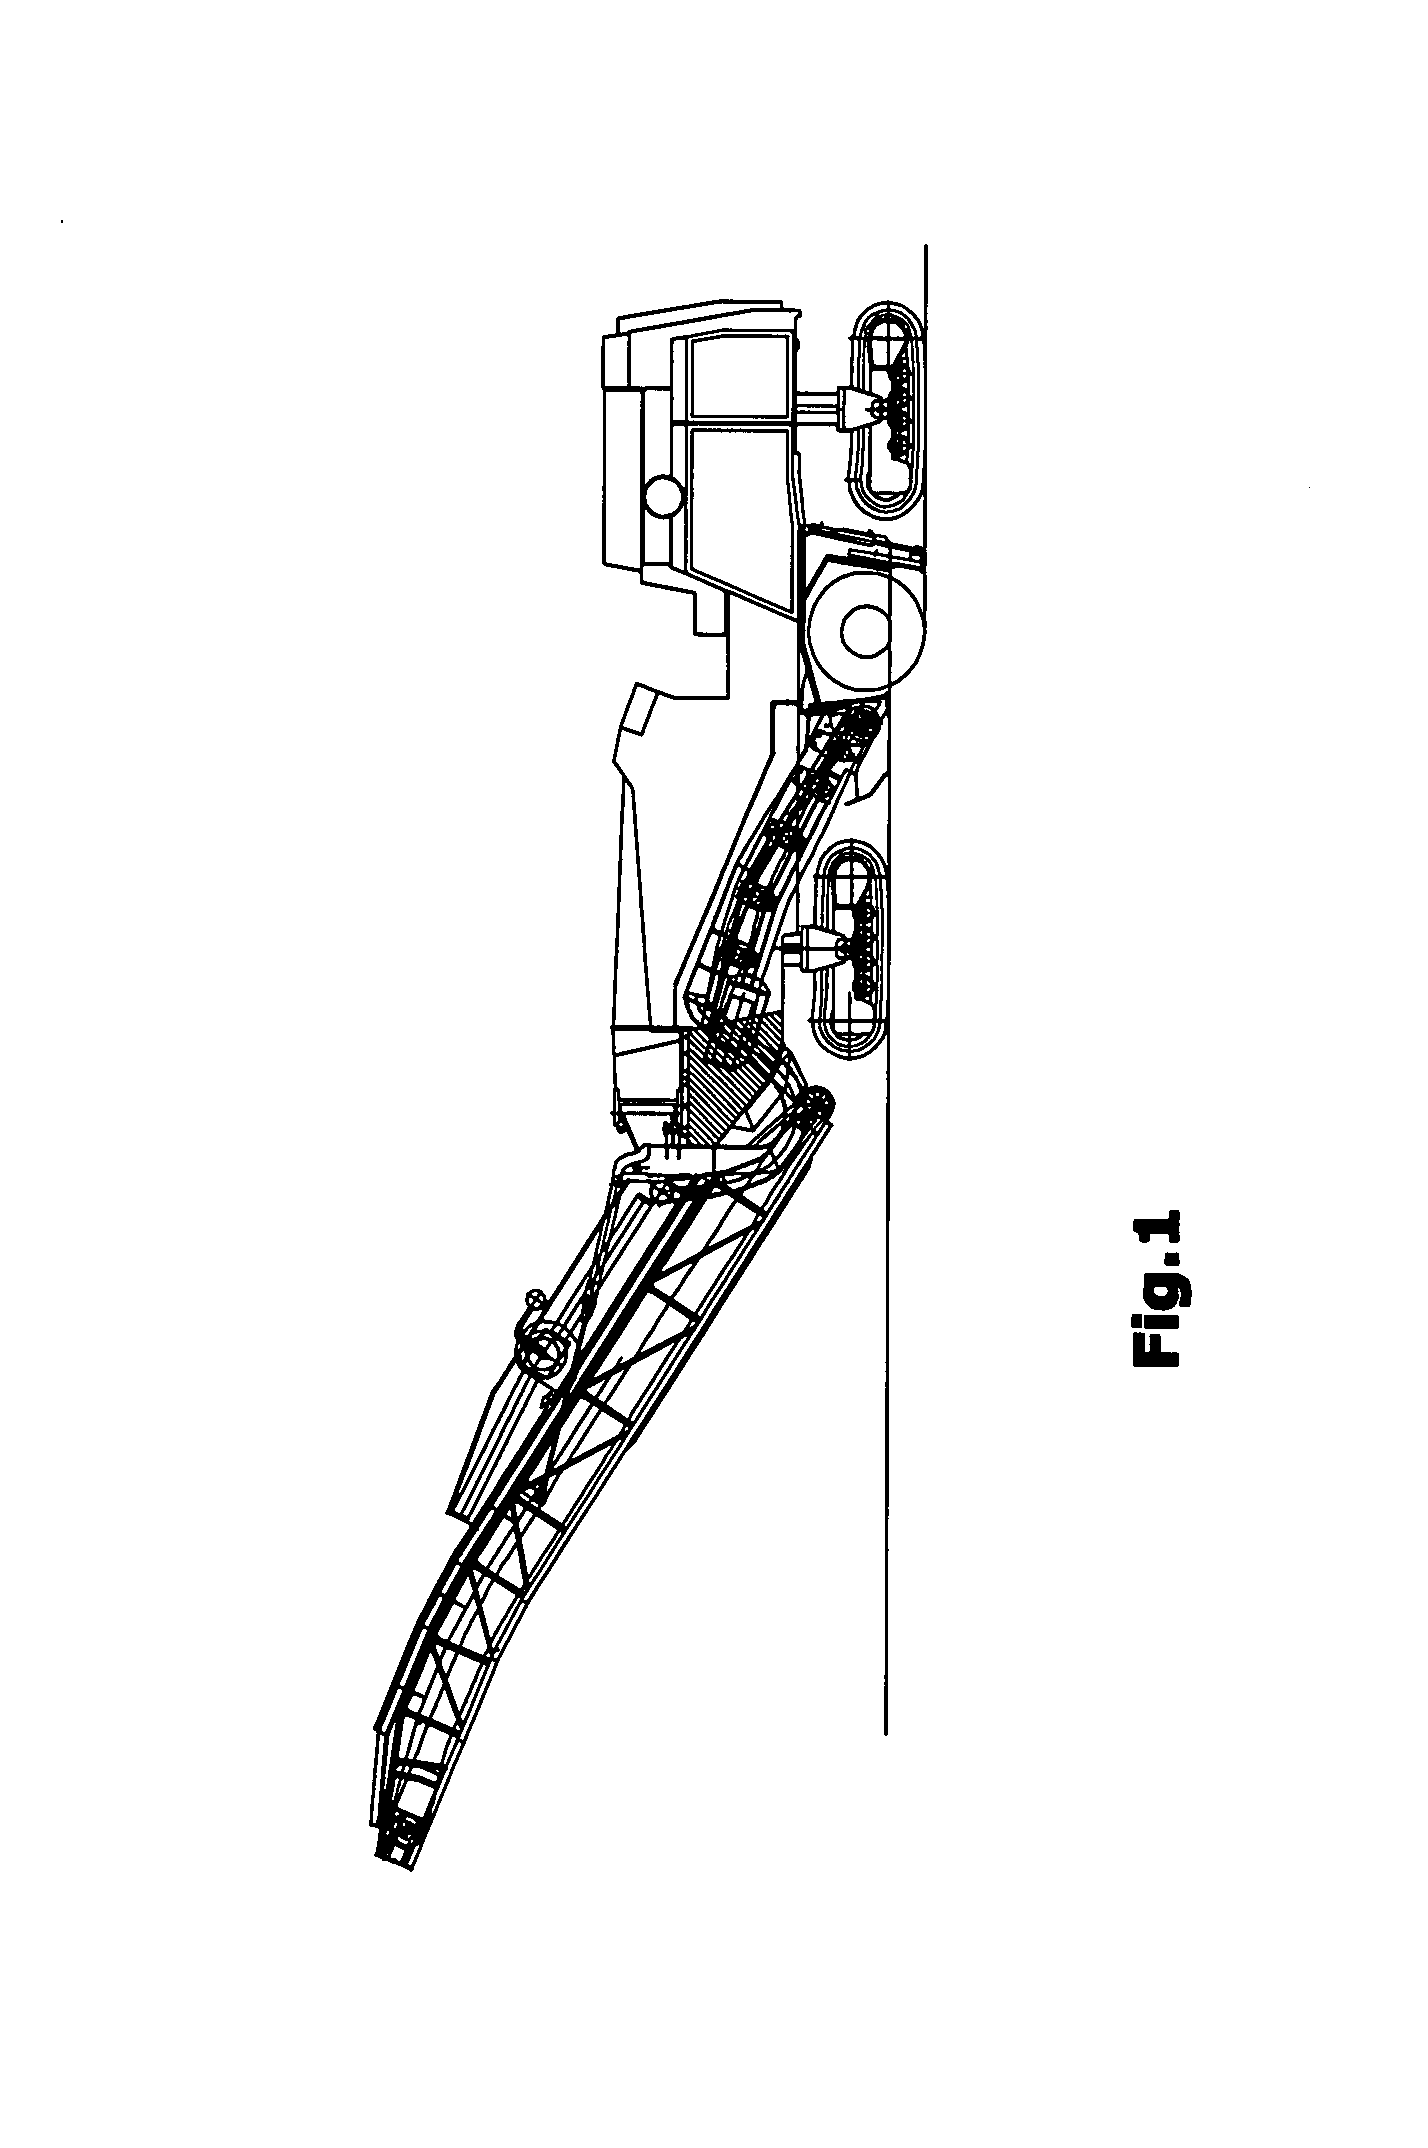 Milling machine as well as method for working ground surfaces